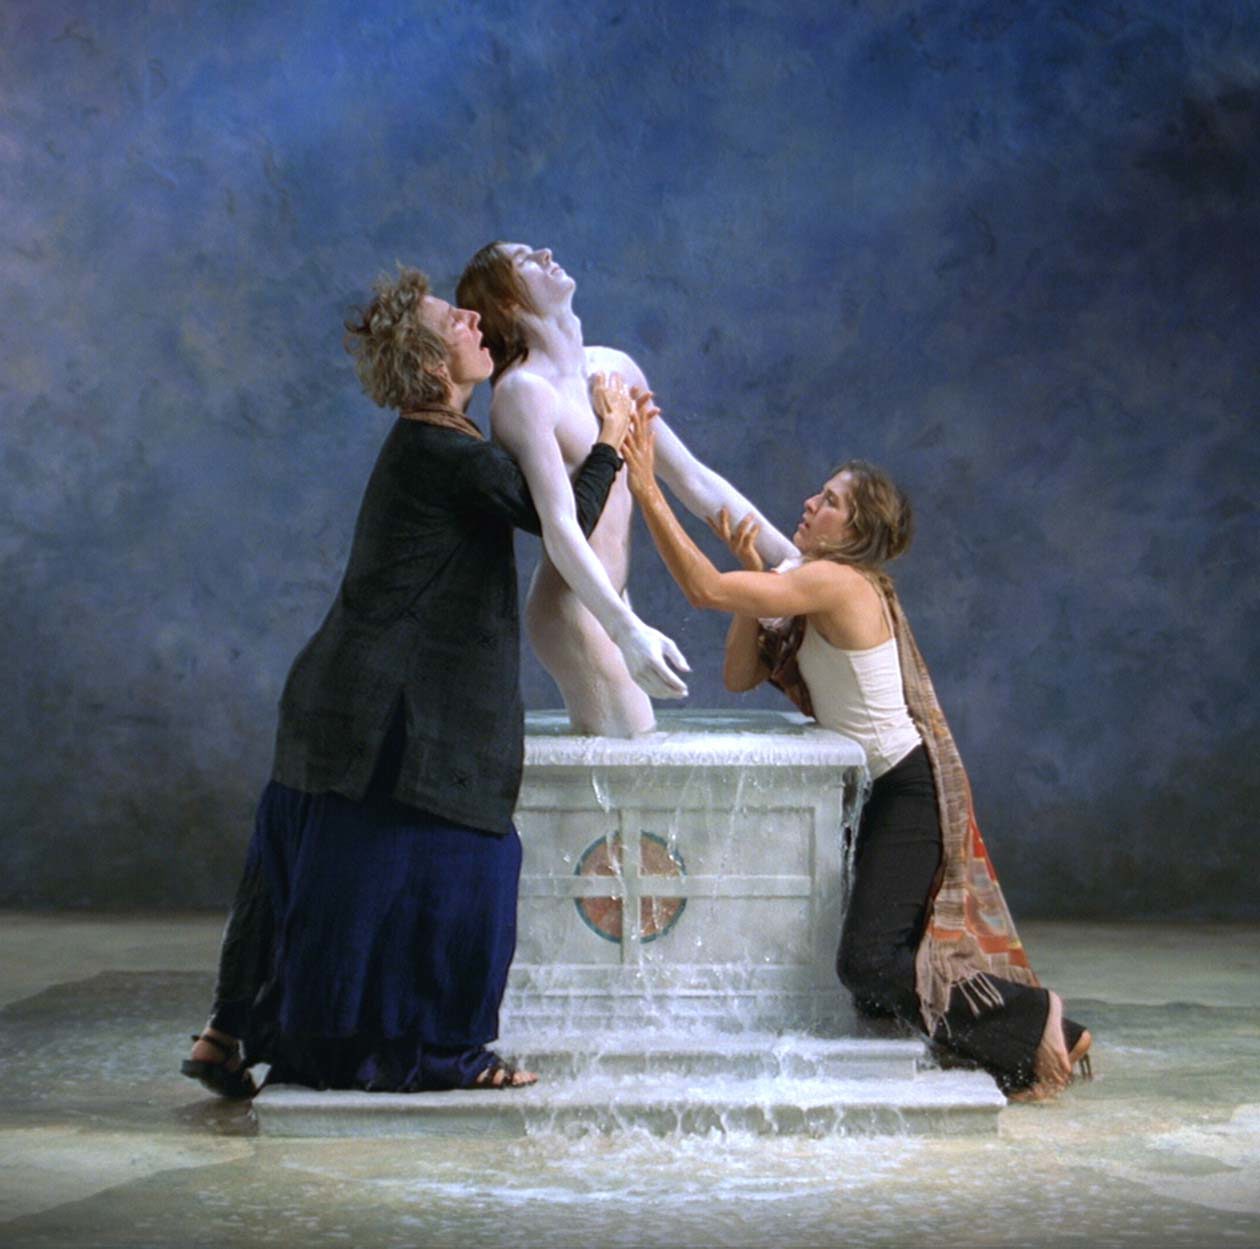 Bill Viola Emergence, 2002 Video installation Color high-definition video rear projection on screen mounted on wall in dark room Projected image size: 213x213 cm 11:40 minutes  Performers: Weba Garretson, John Hay, Sarah Steben Photo: Kira Perov © Bill Viola Studio